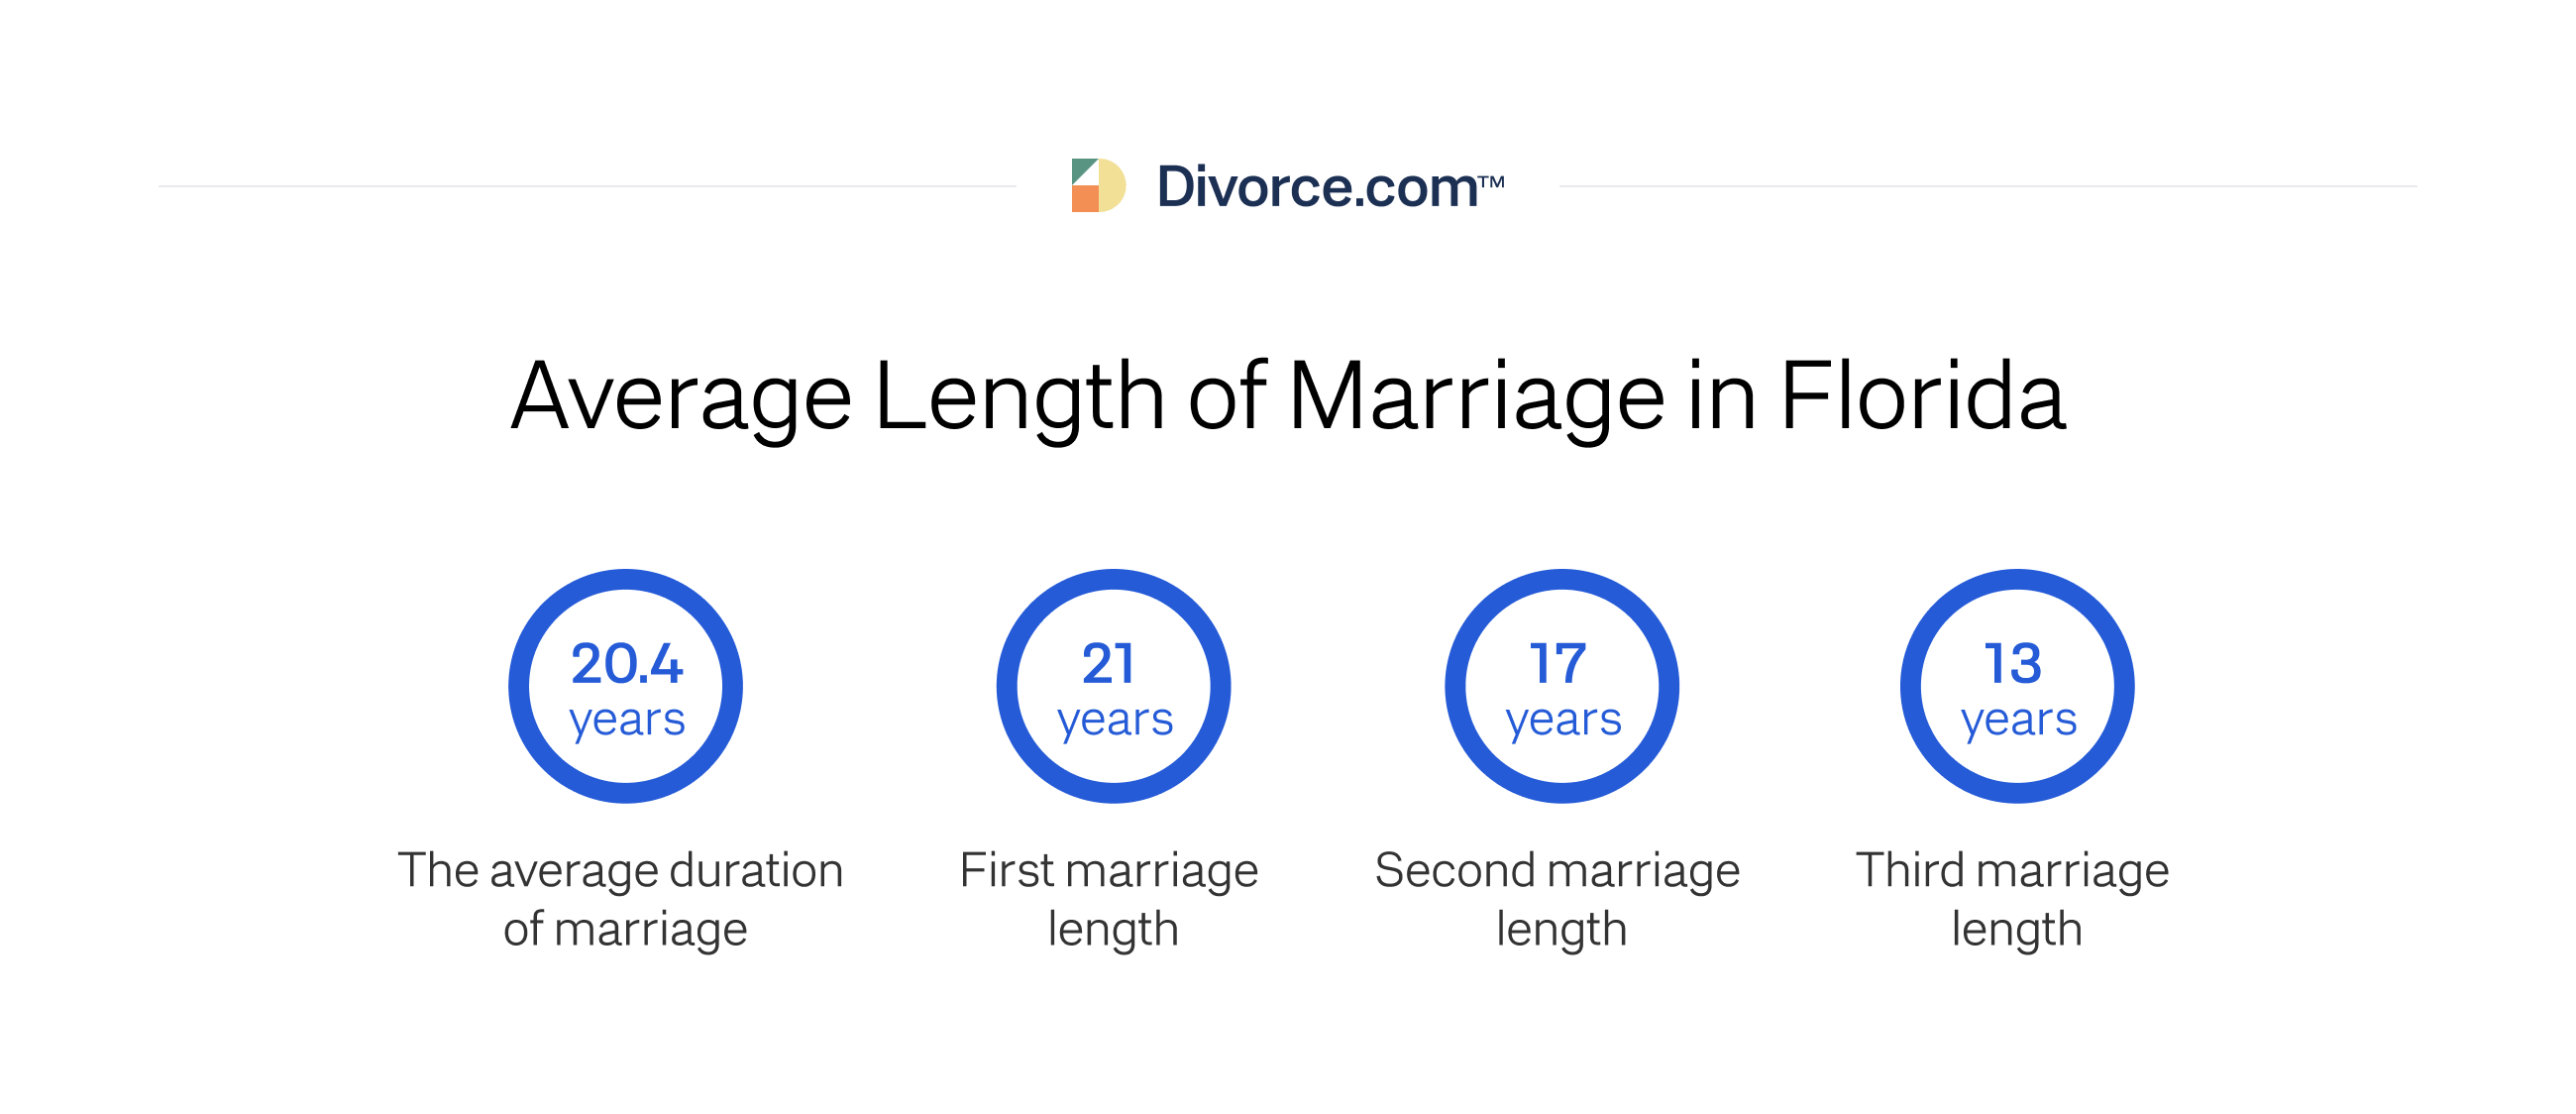 Average Length of Marriage in Florida